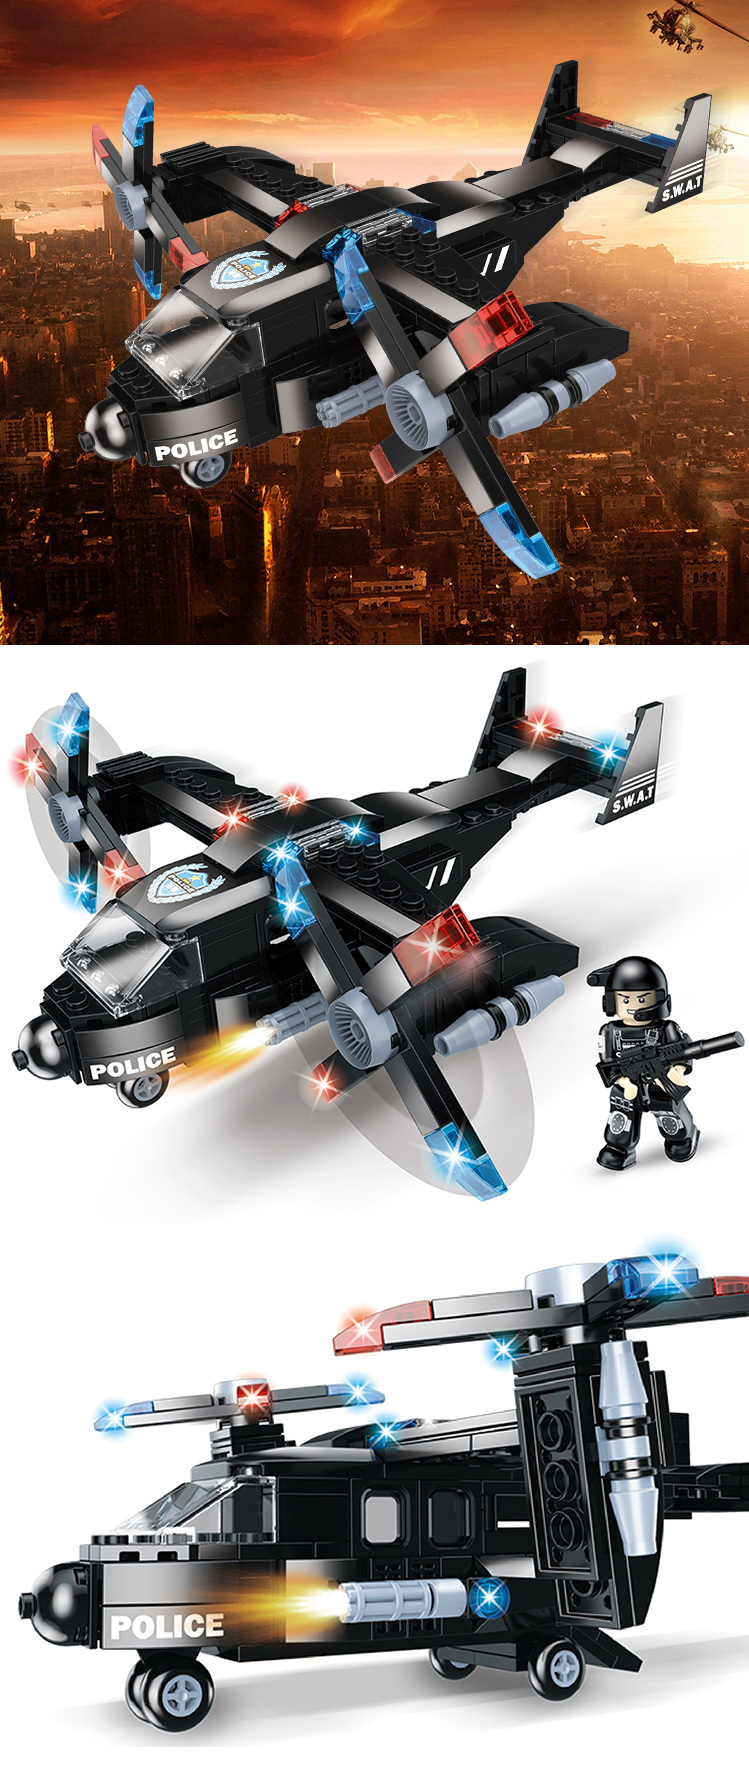 WOMA TOYS wish hot sale Cheap City Police SWAT Team Helicopter model building blocks toys Set diy bricks